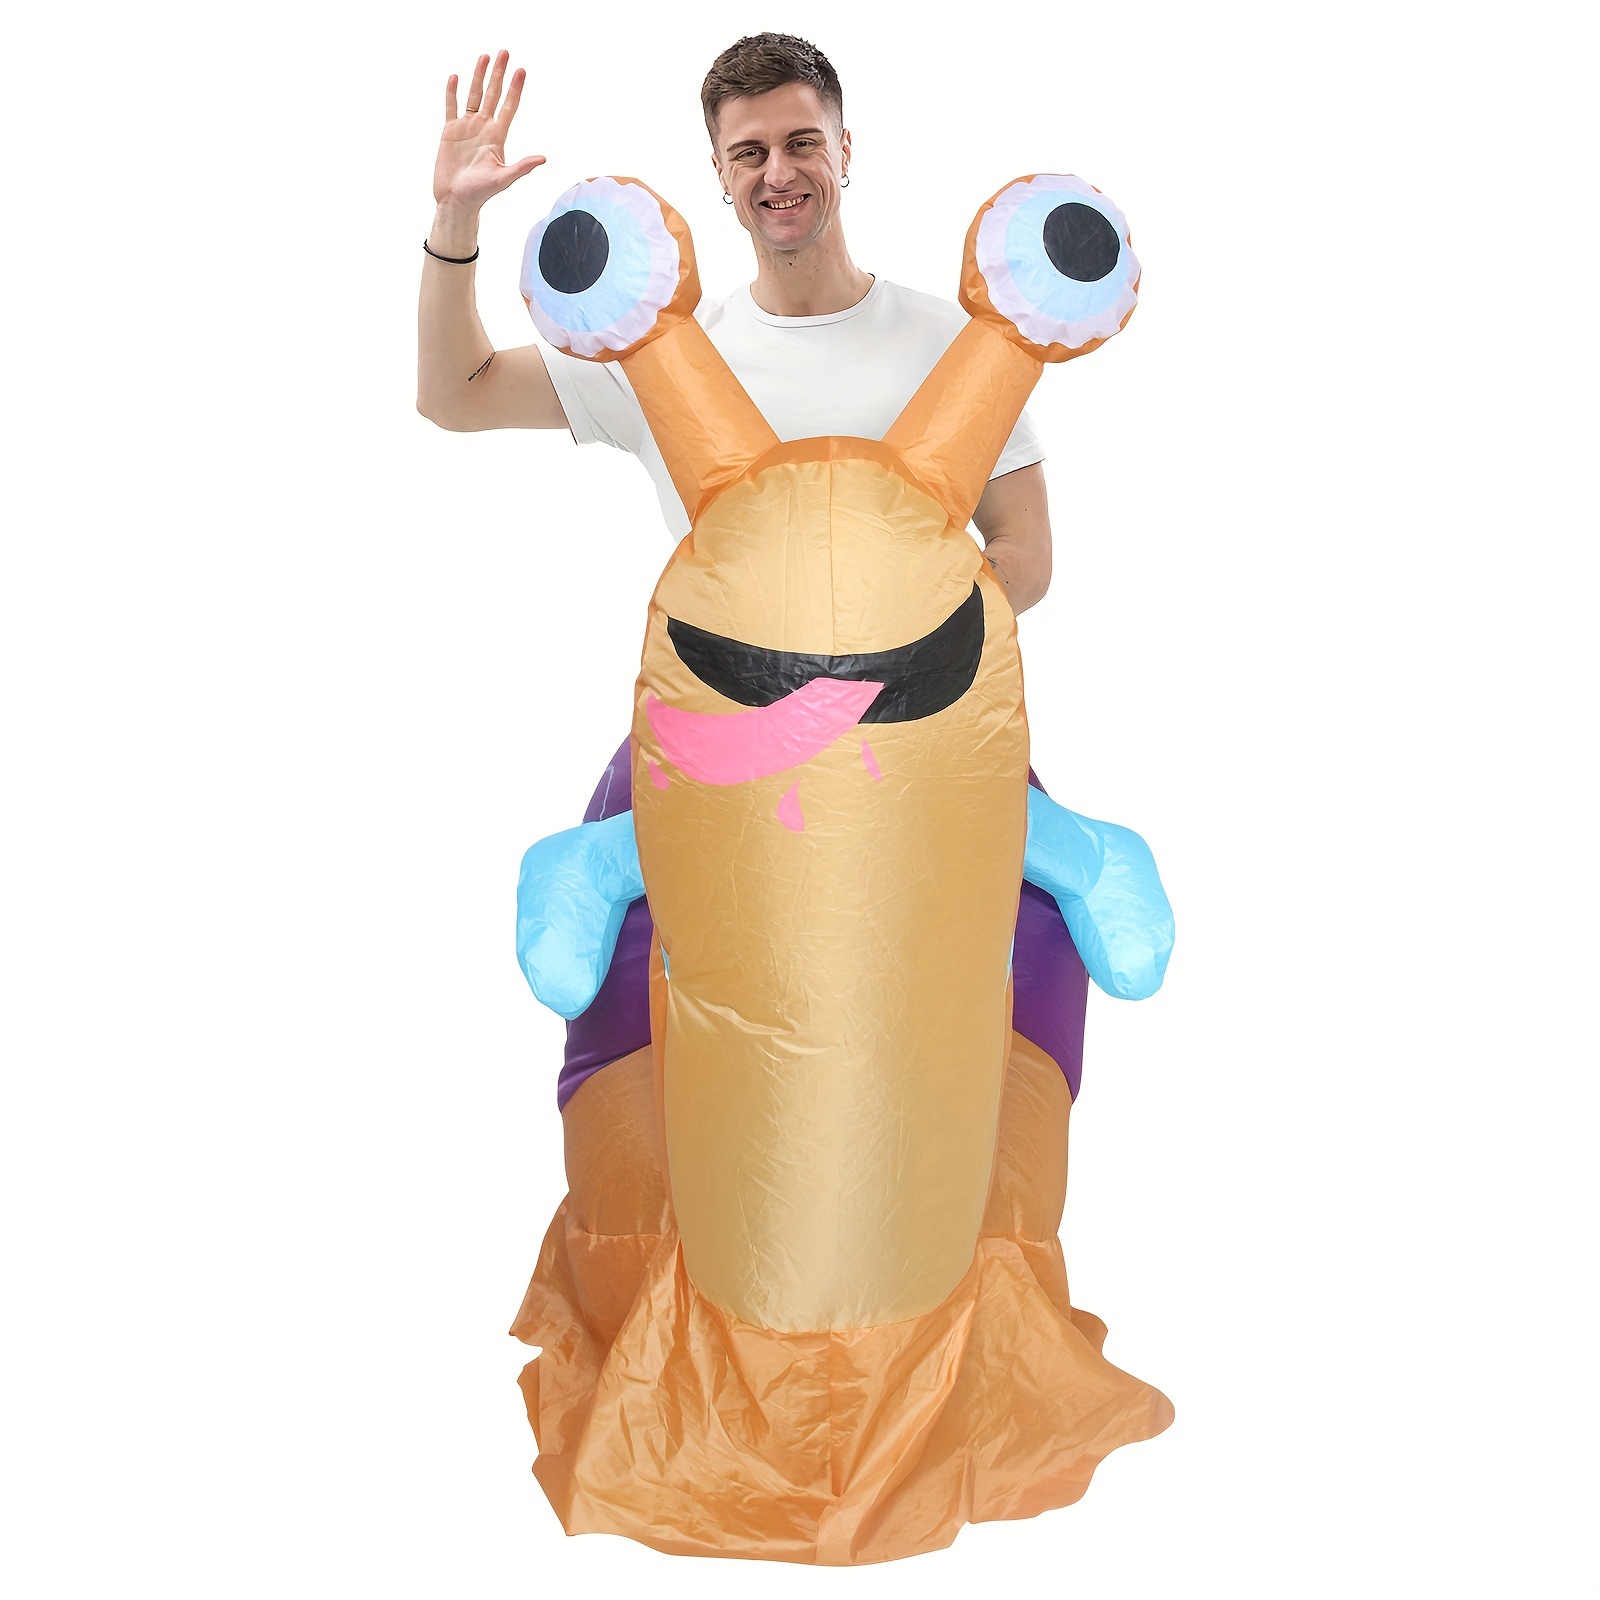  3 Pcs Halloween Adult Blow up Costumes Inflatable Full